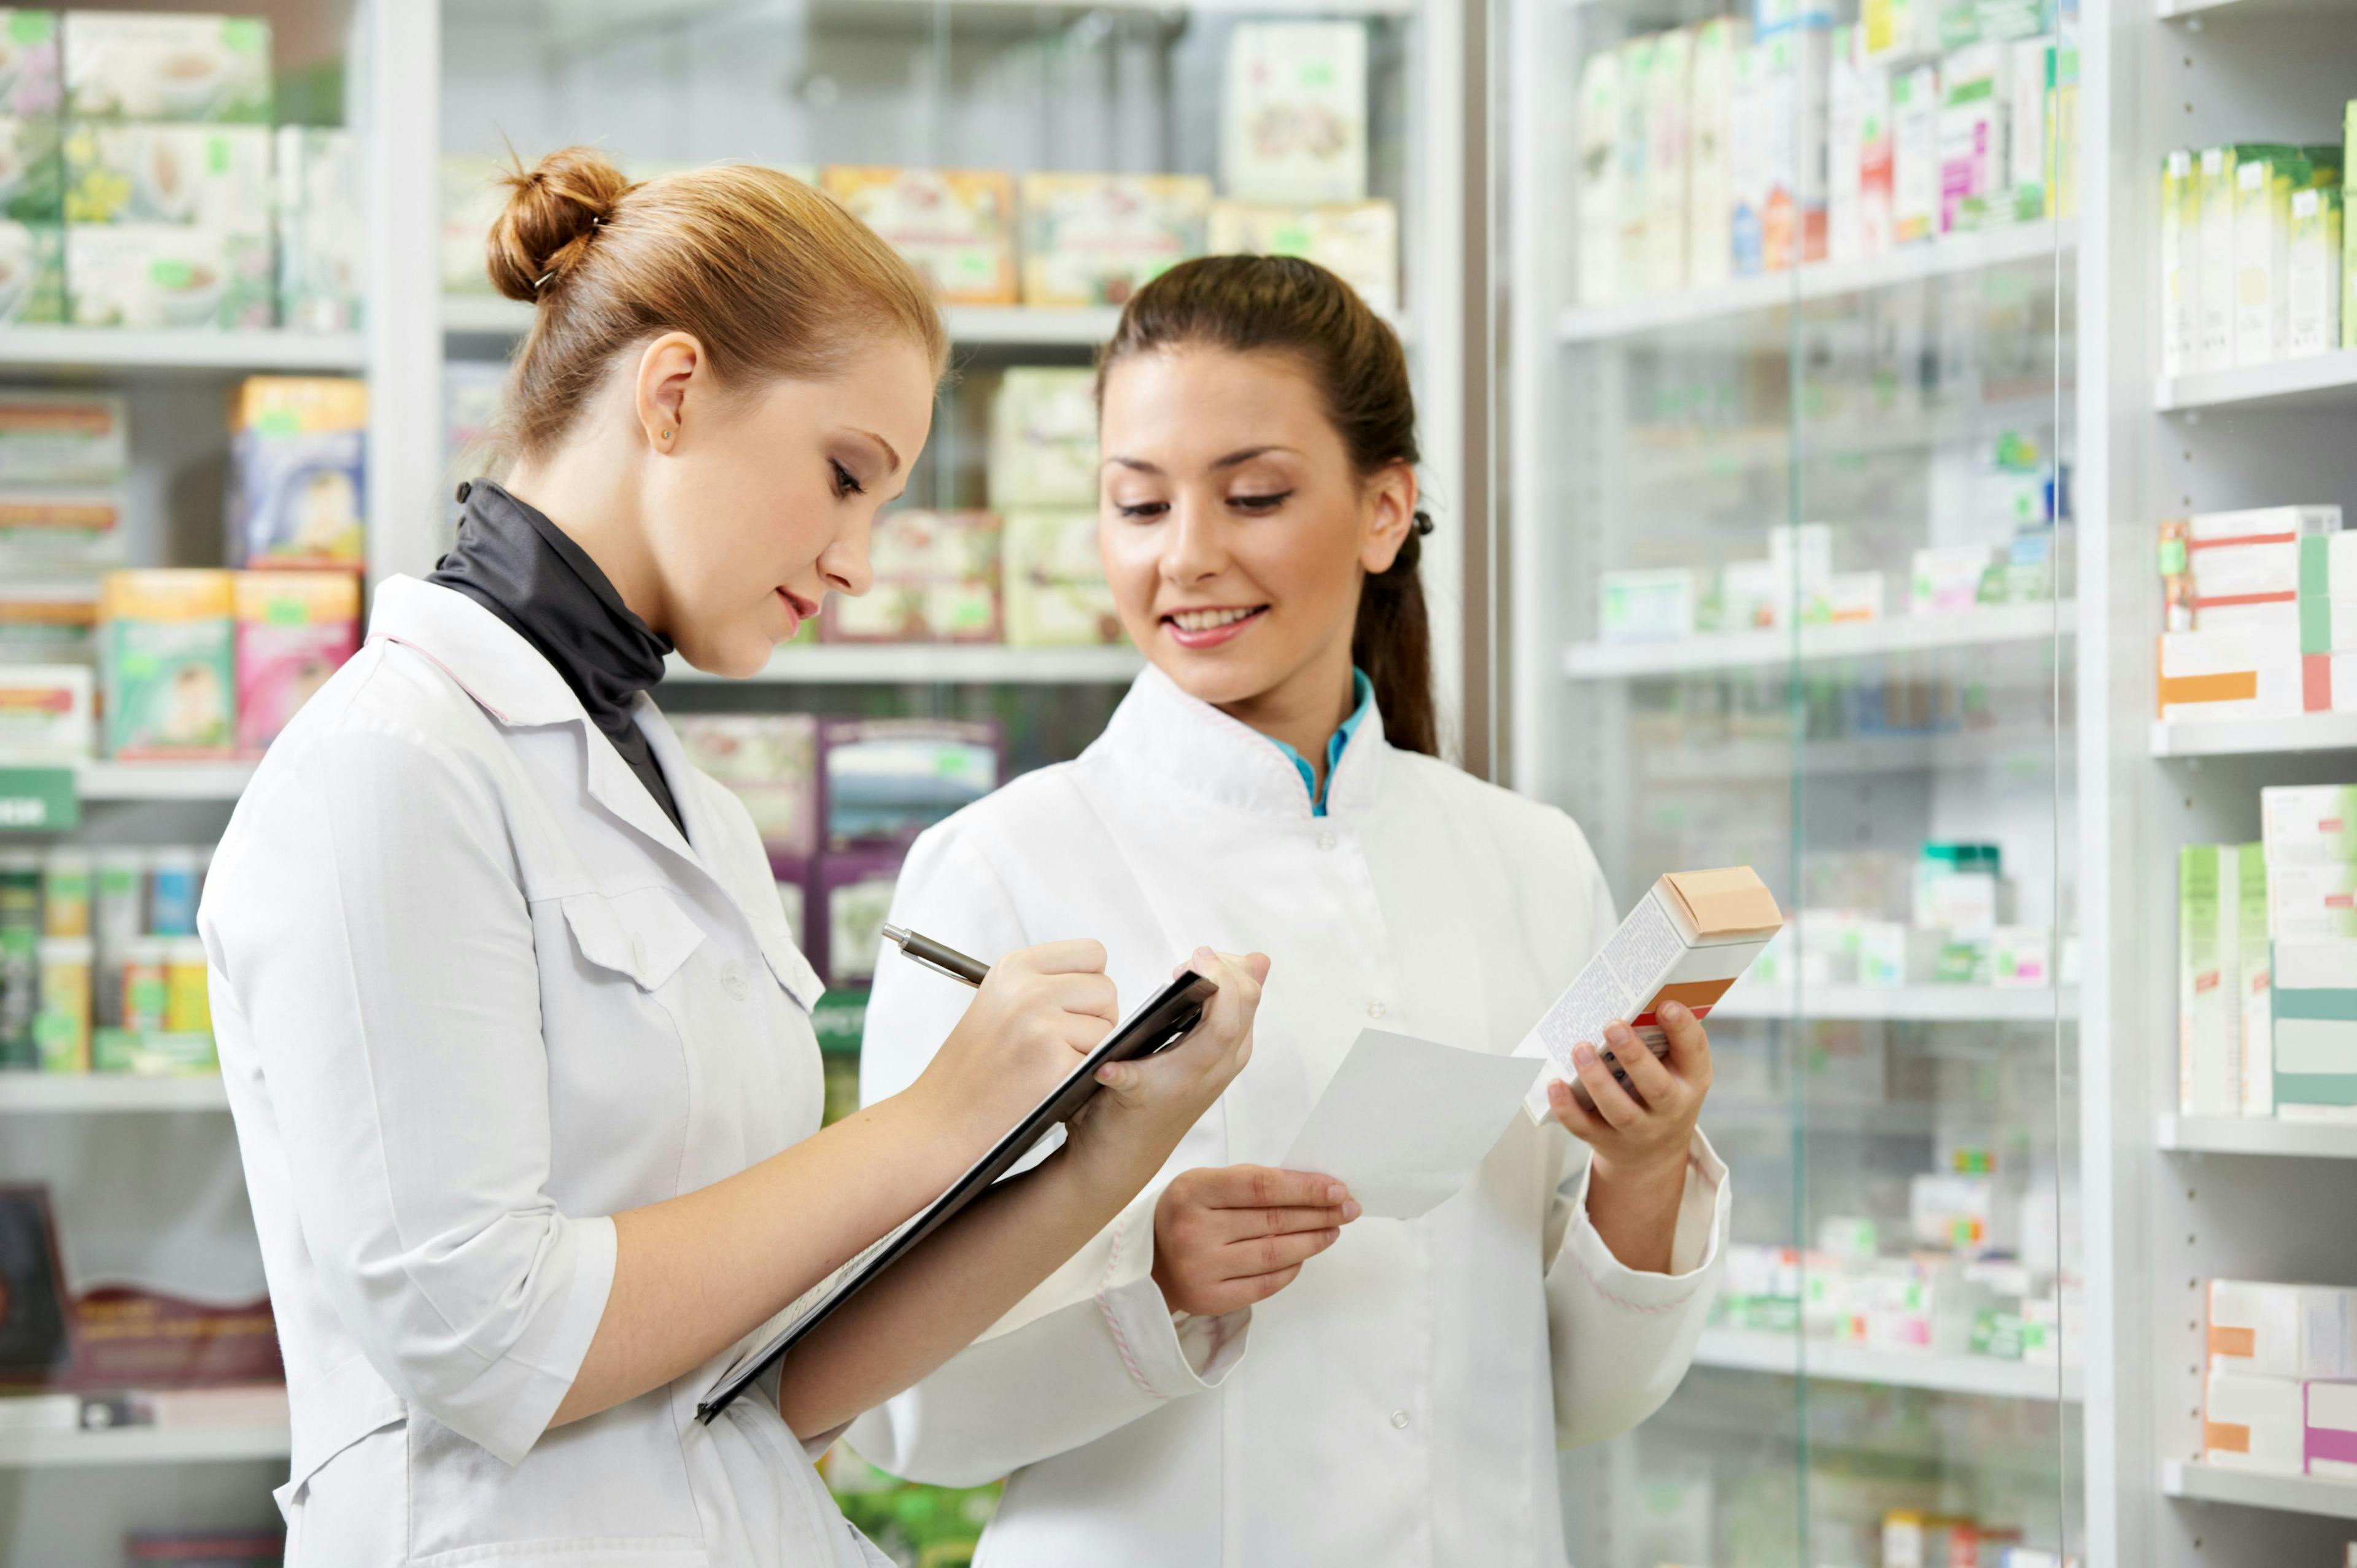 The Technician’s Role Set to Expand Within the Pharmacy